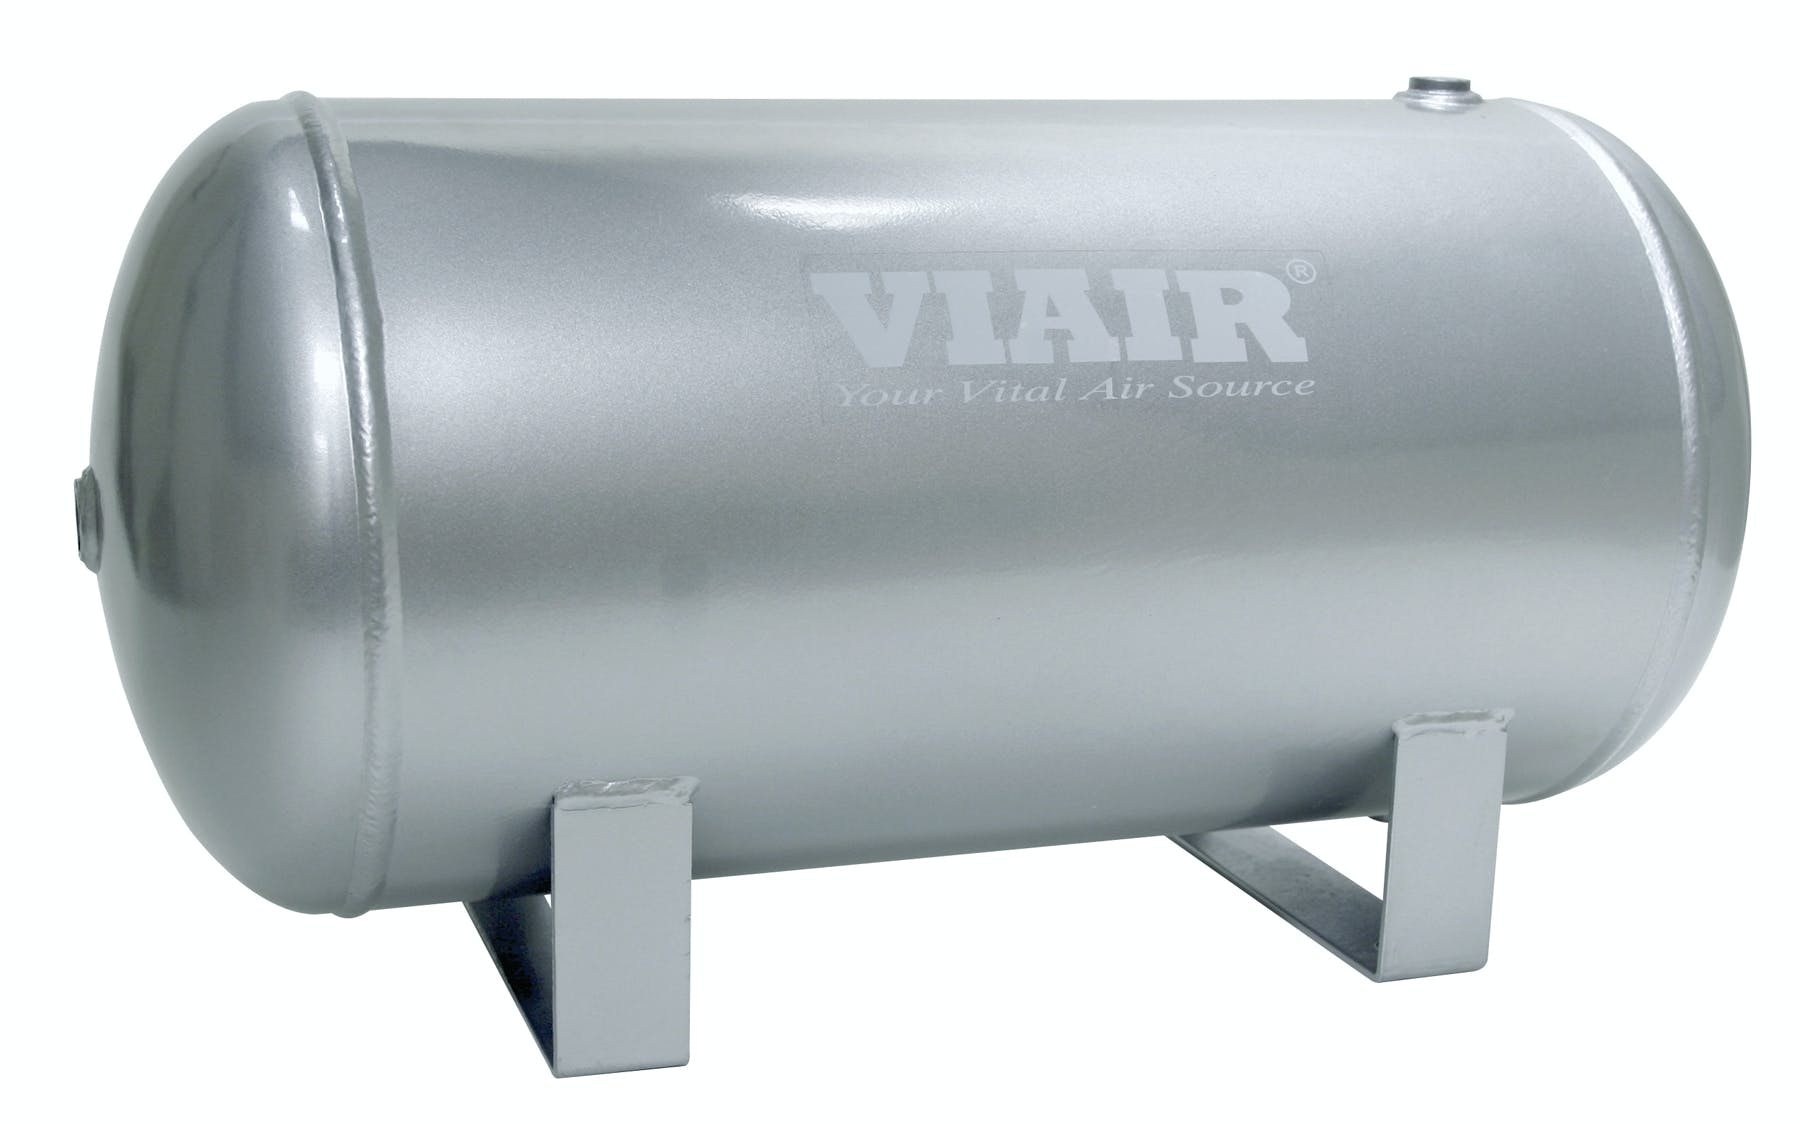 VIAIR 91050 5.0 Gallon Air Tank Two 1/4in NPT Ports and Two 3/8in NPT Ports 150 psi Rat